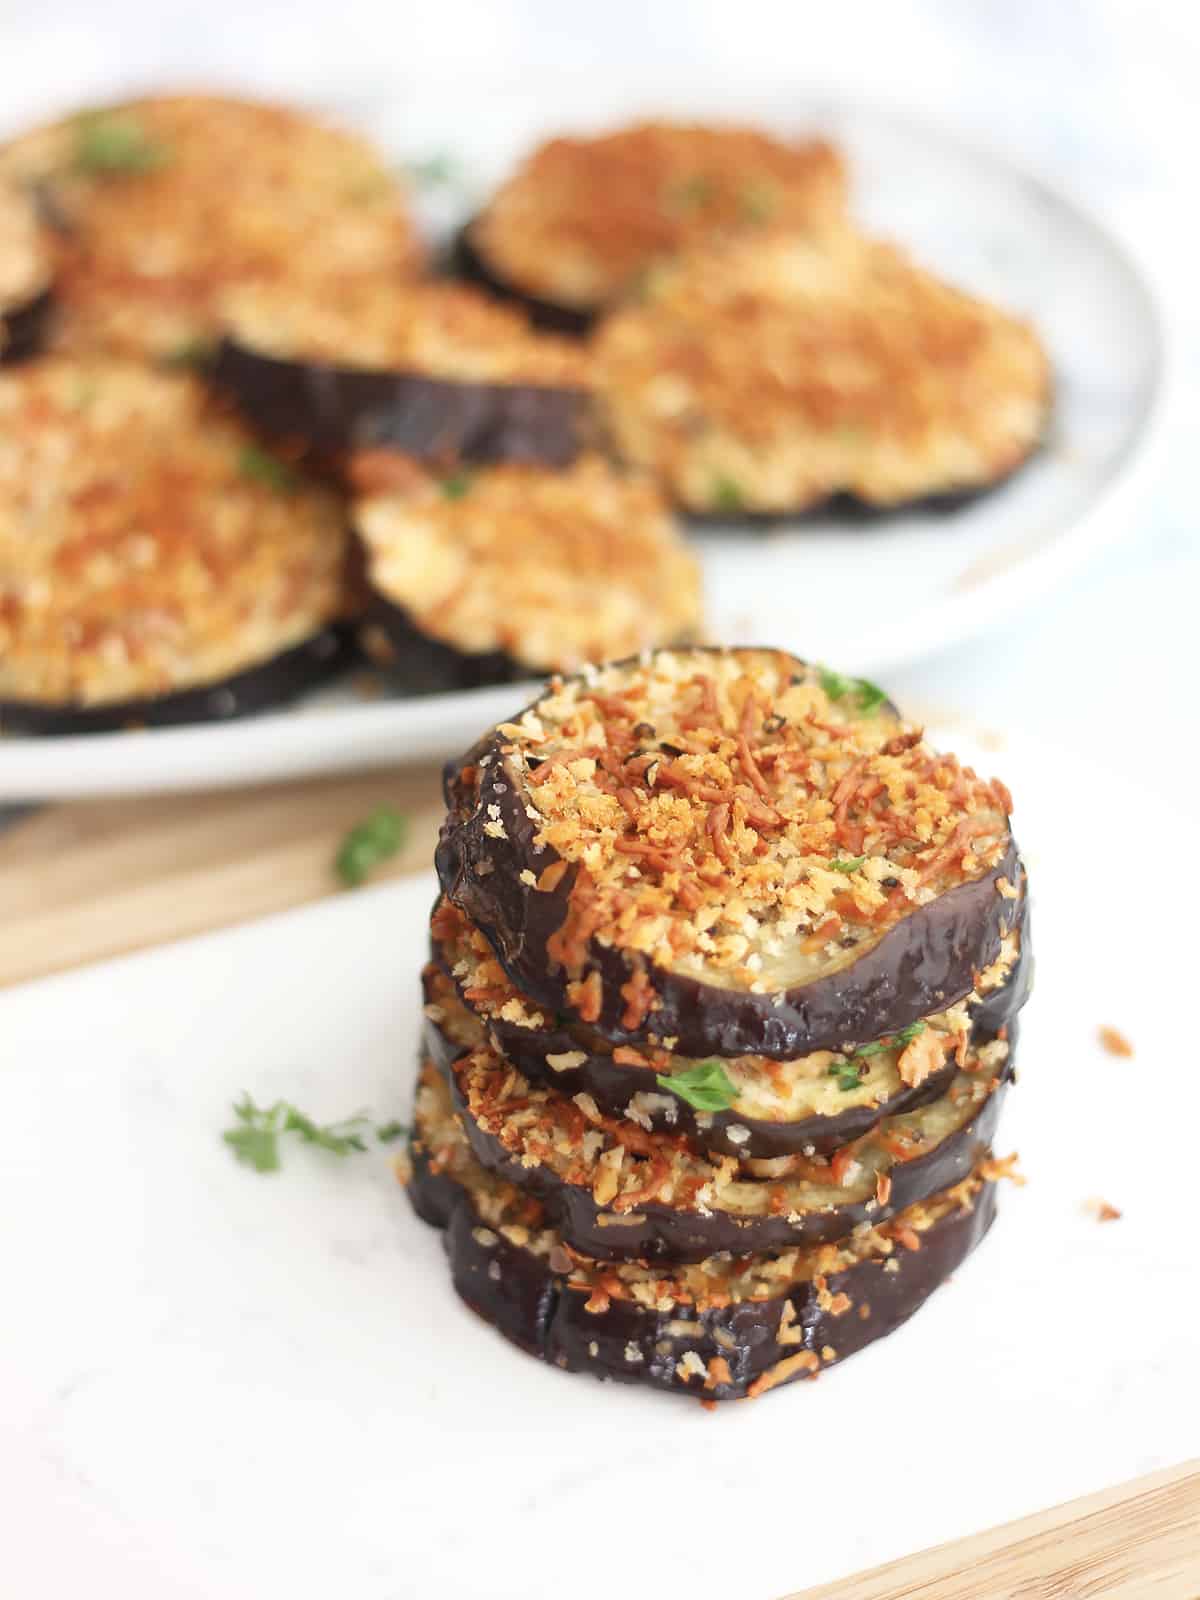 Four eggplant rounds stacked on top of each other.